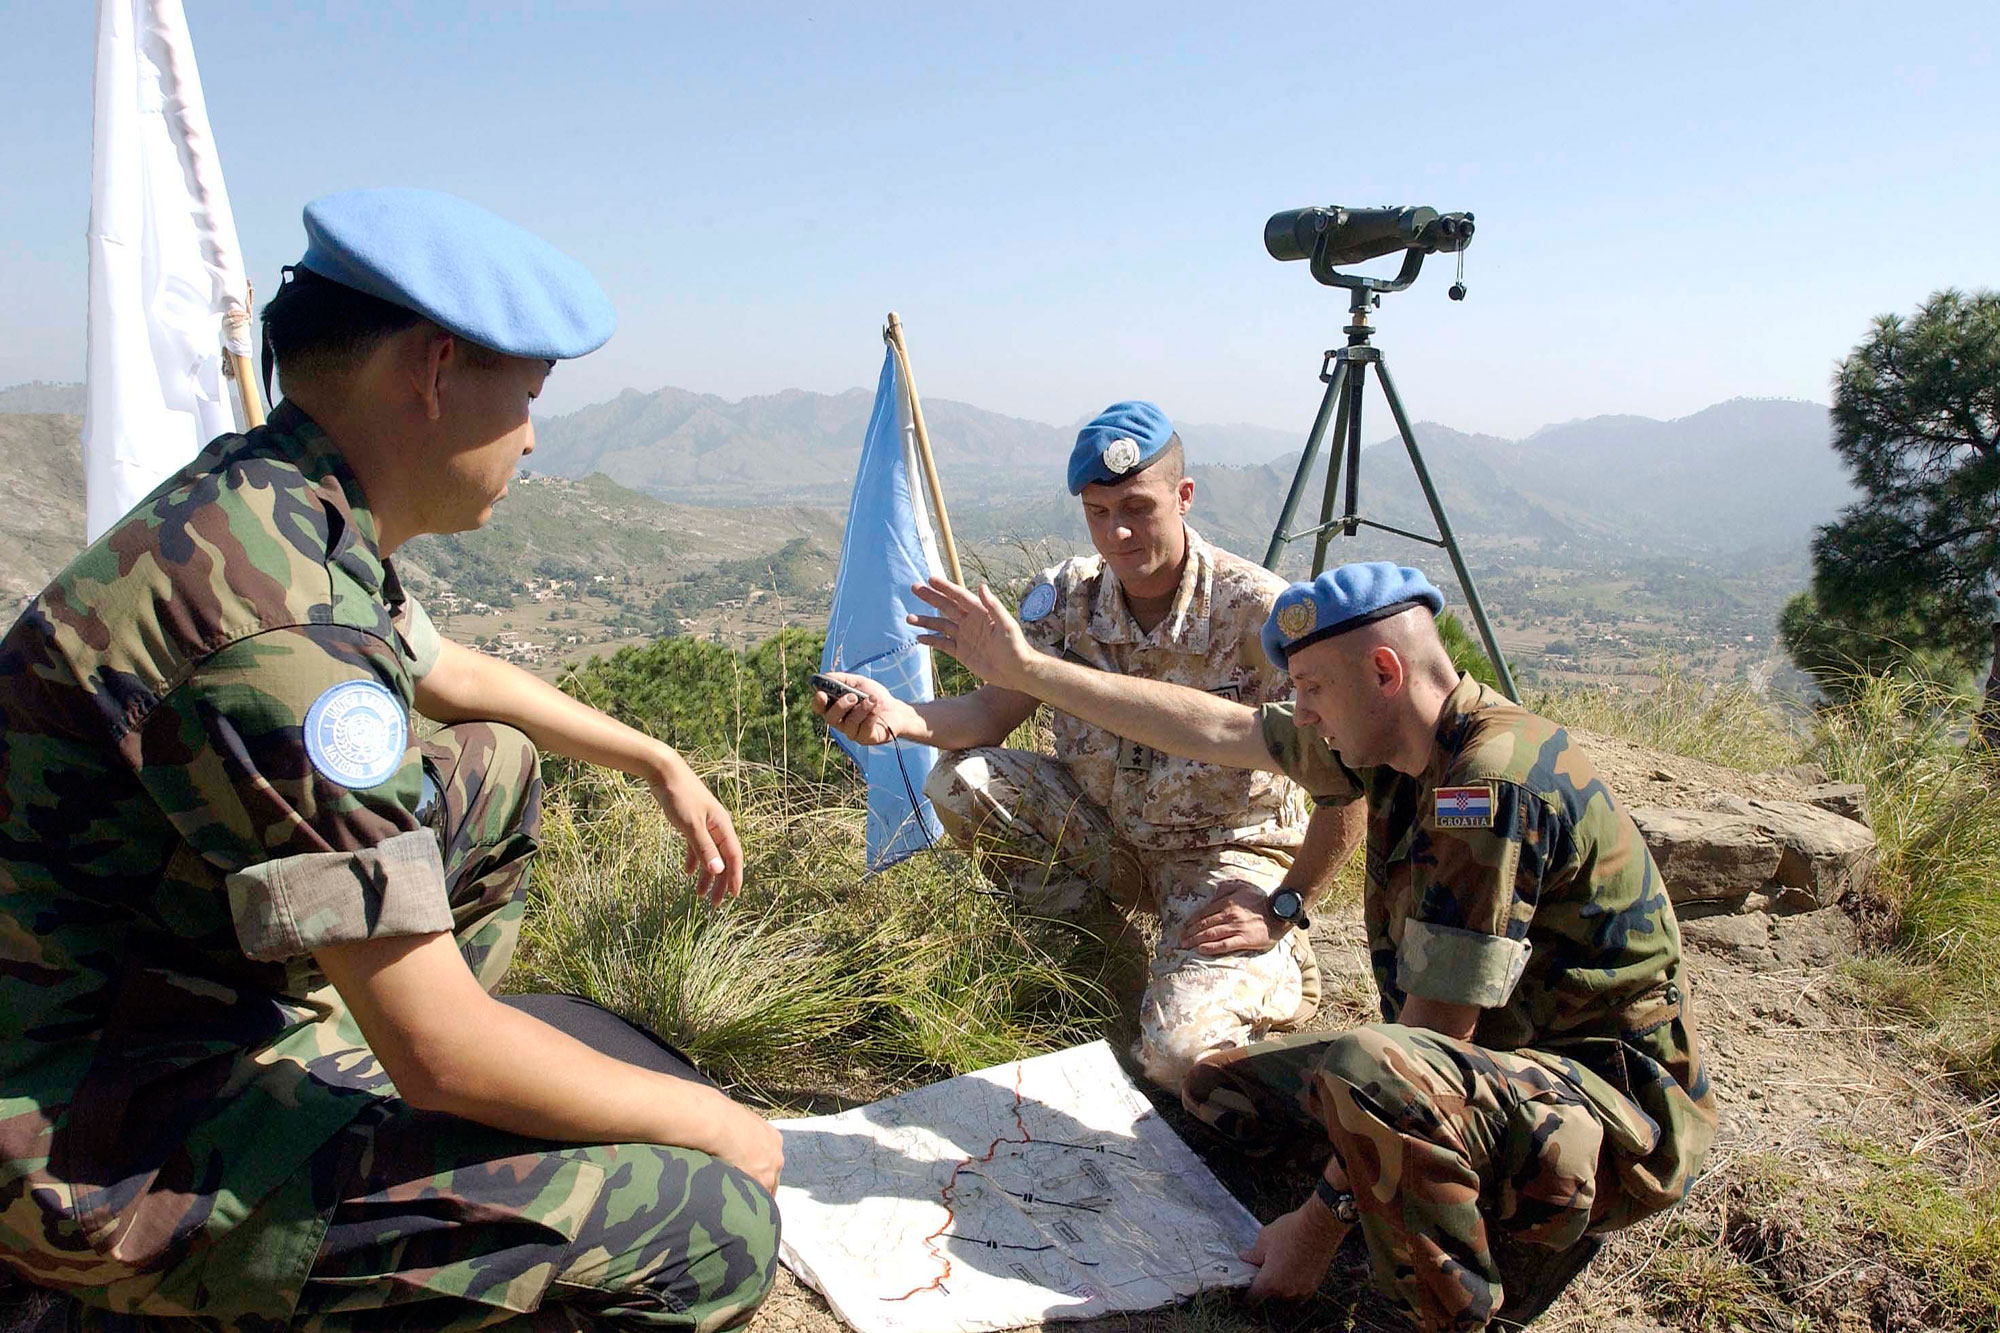 Peacekeepers from the UN Military Observer Group in India and Pakistan (UNMOGIP) are pictured here, near Pakistan’s Bhimbar field station in October 2005, going over their plans for the day in observing the Line of Control that separates the two countries. UN Photo/Evan Schneider